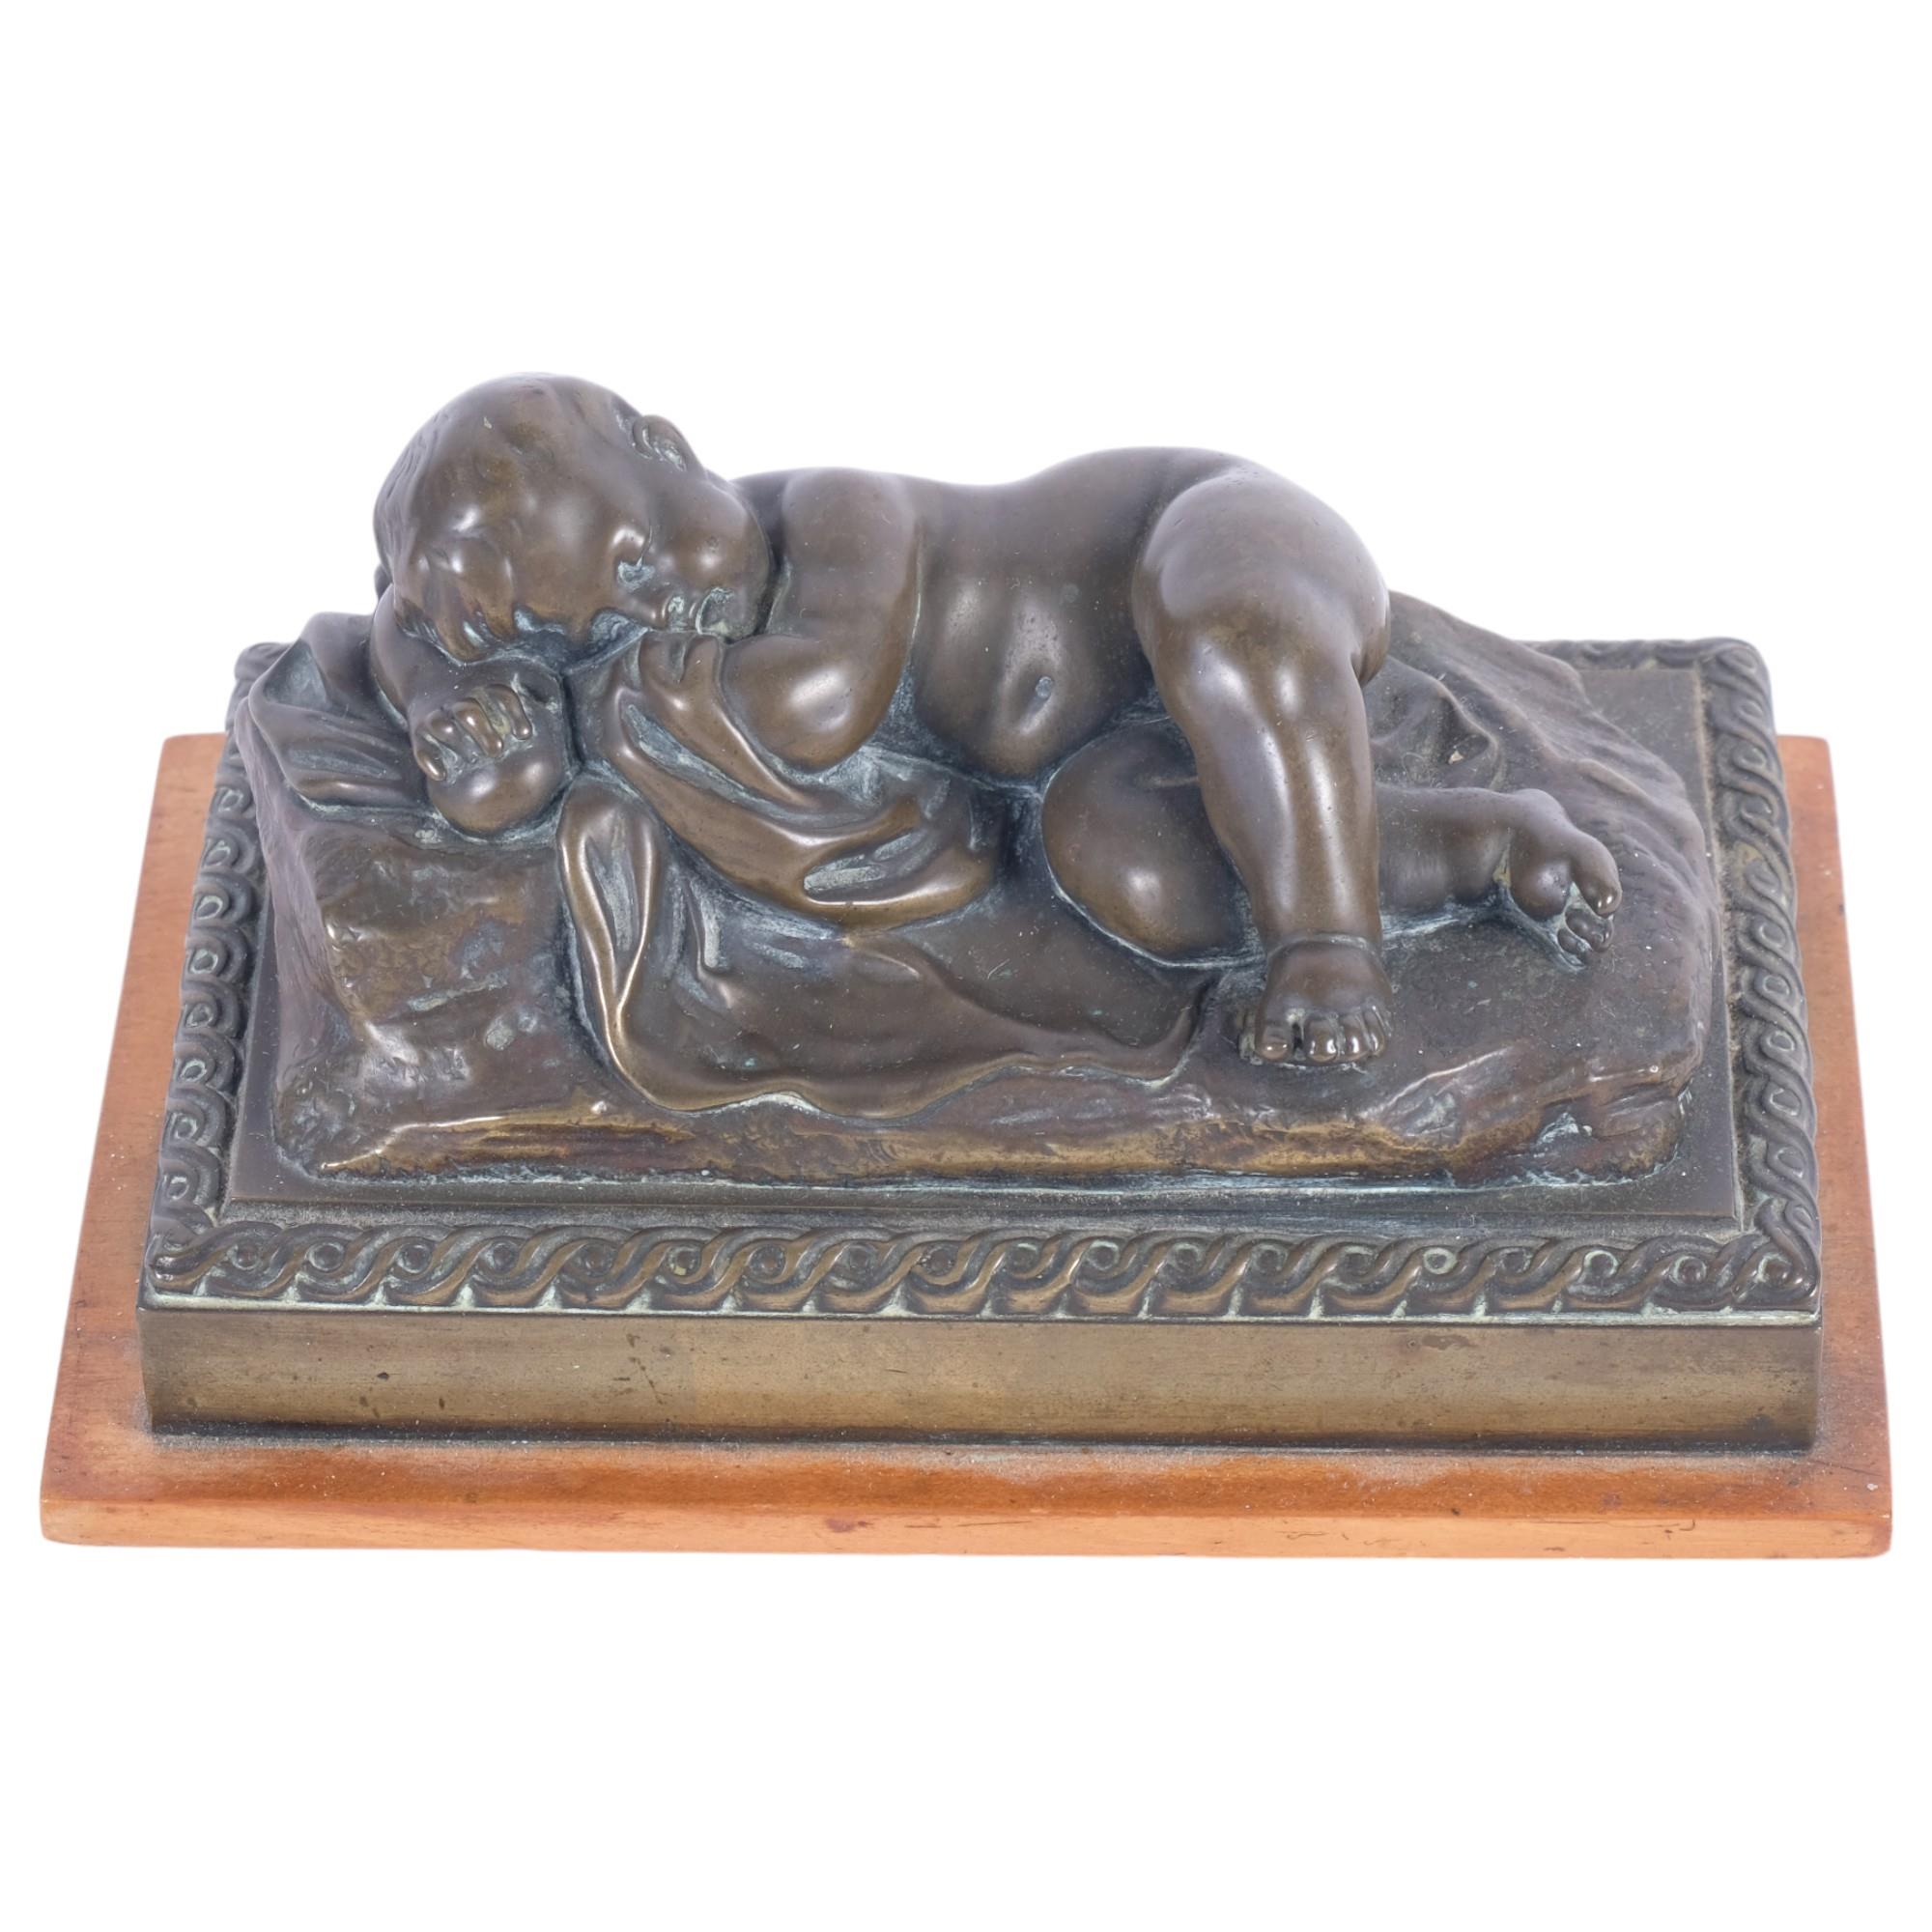 A patinated cast-bronze study of a sleeping child, overall length 15.5cm